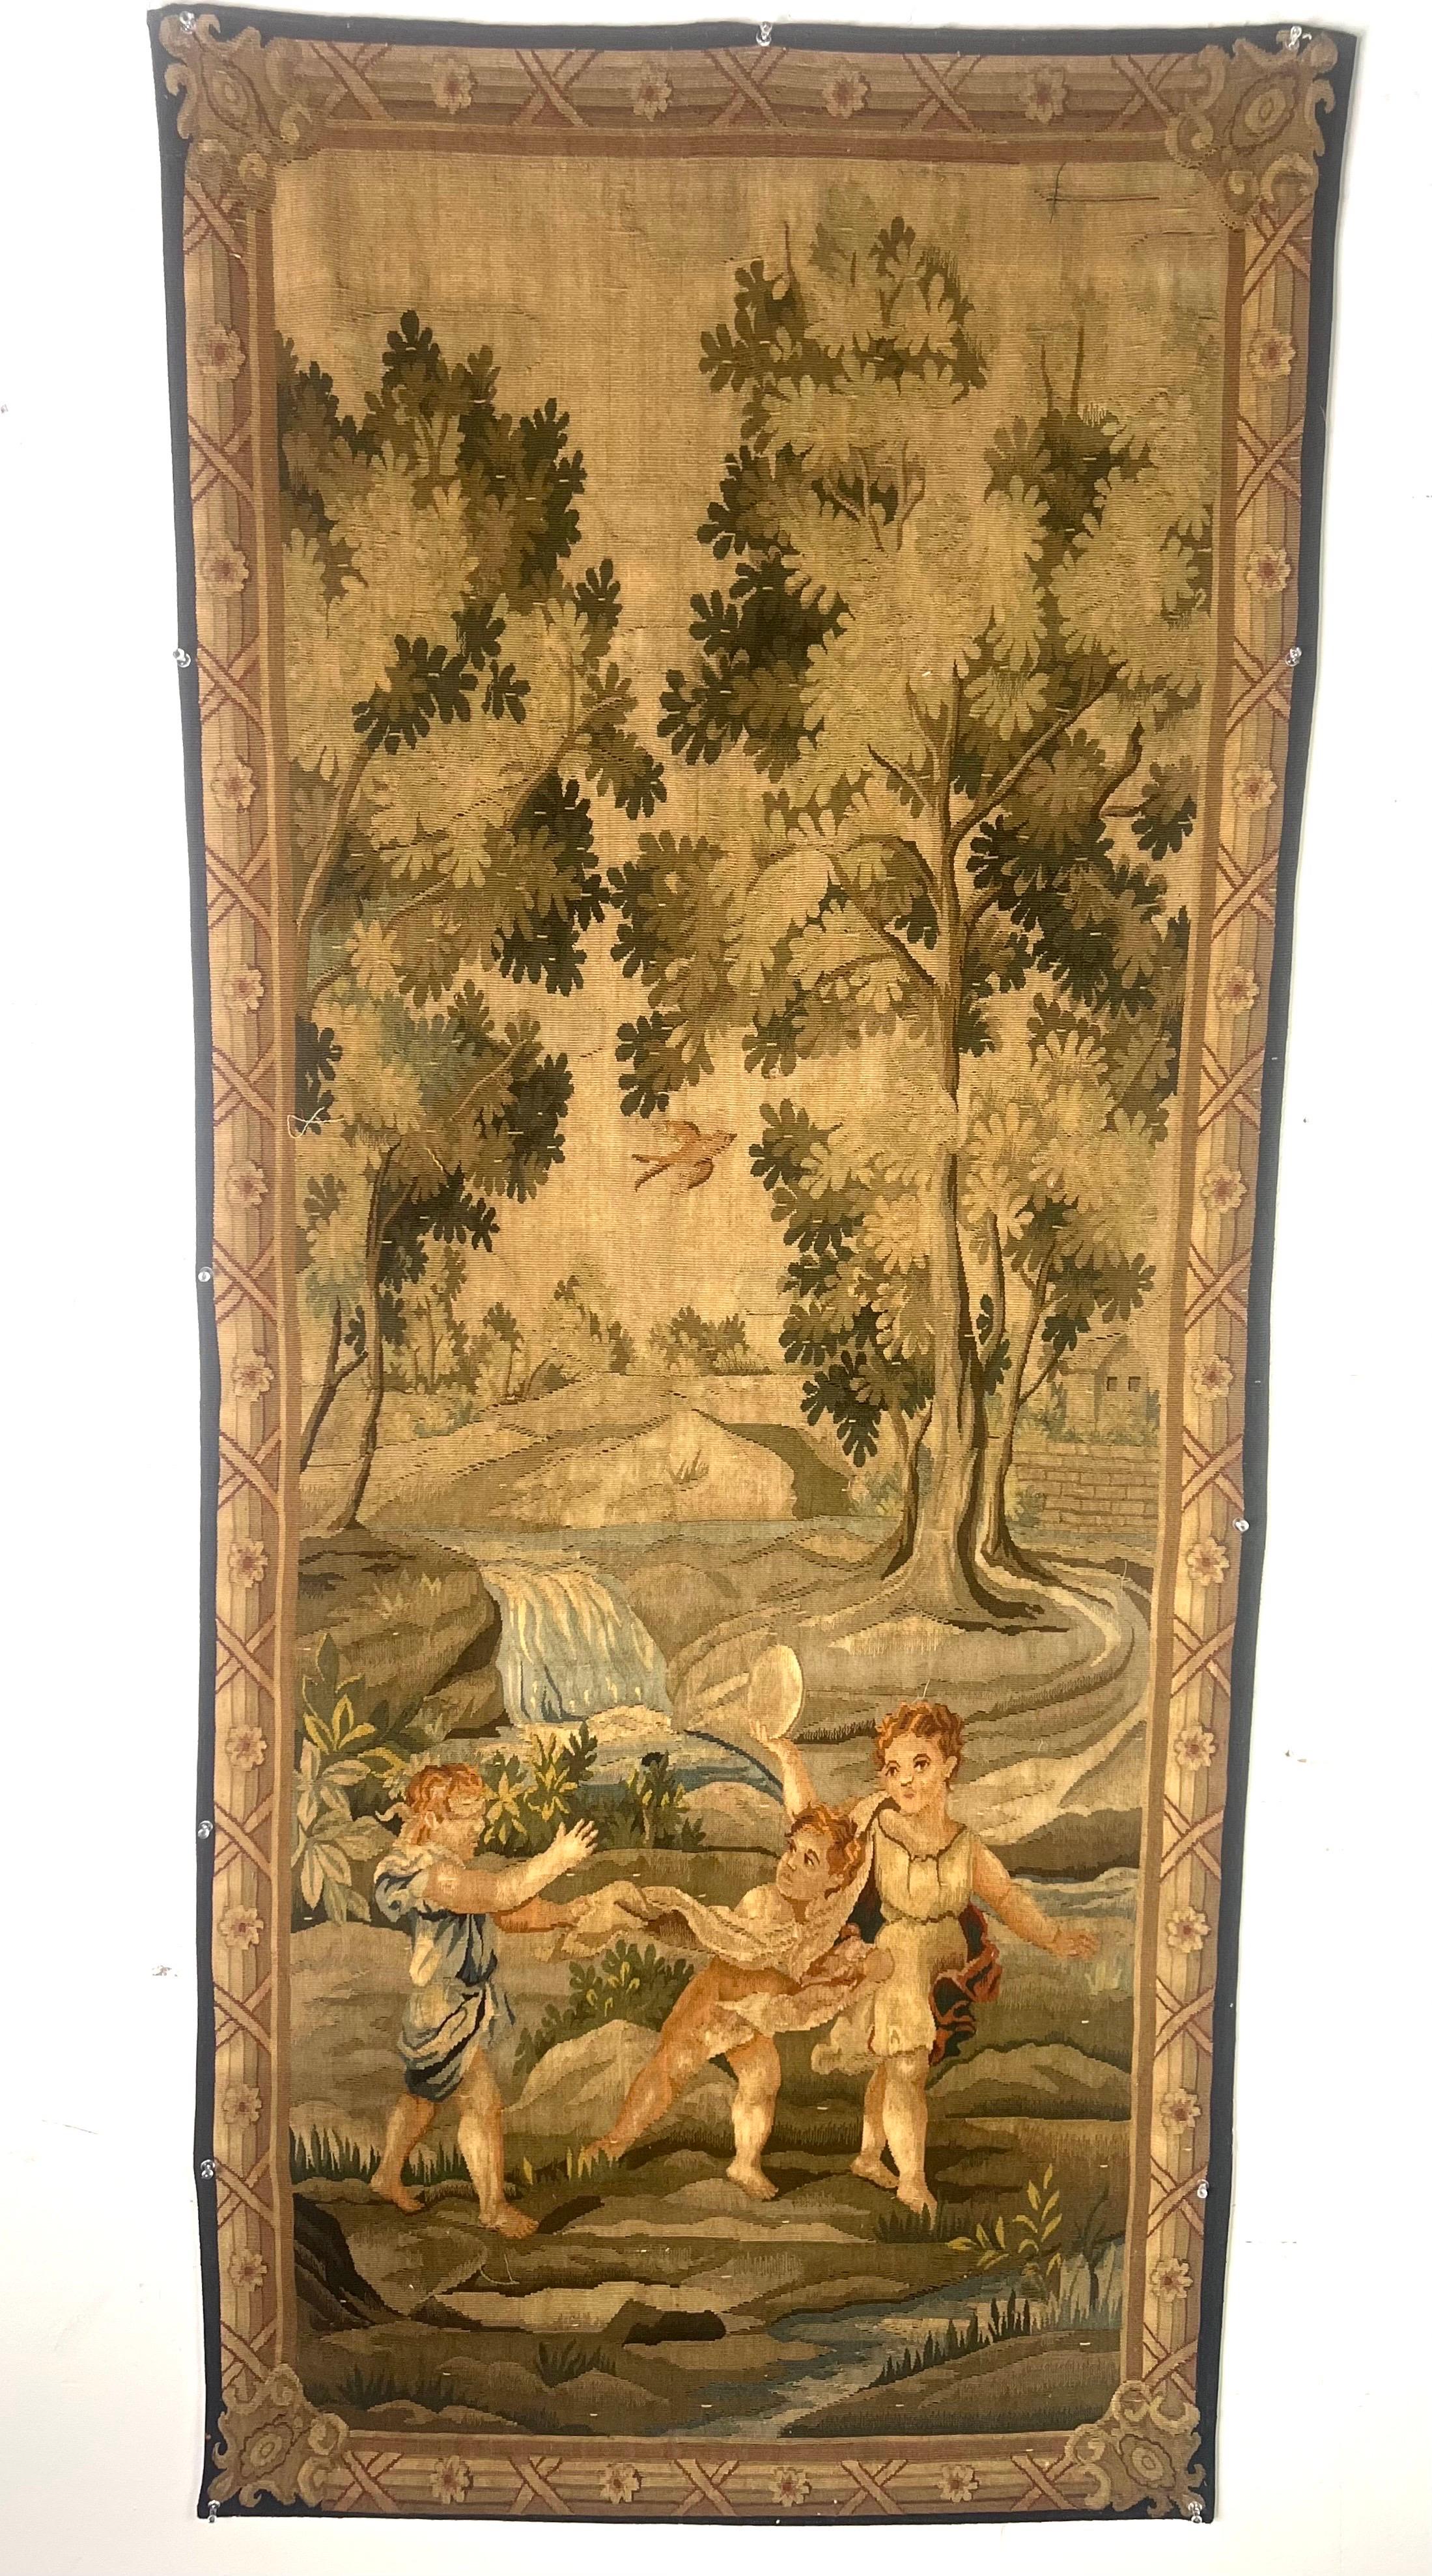 Hand-Woven Charming Romantic Early 19th-Century French Tapestry  For Sale